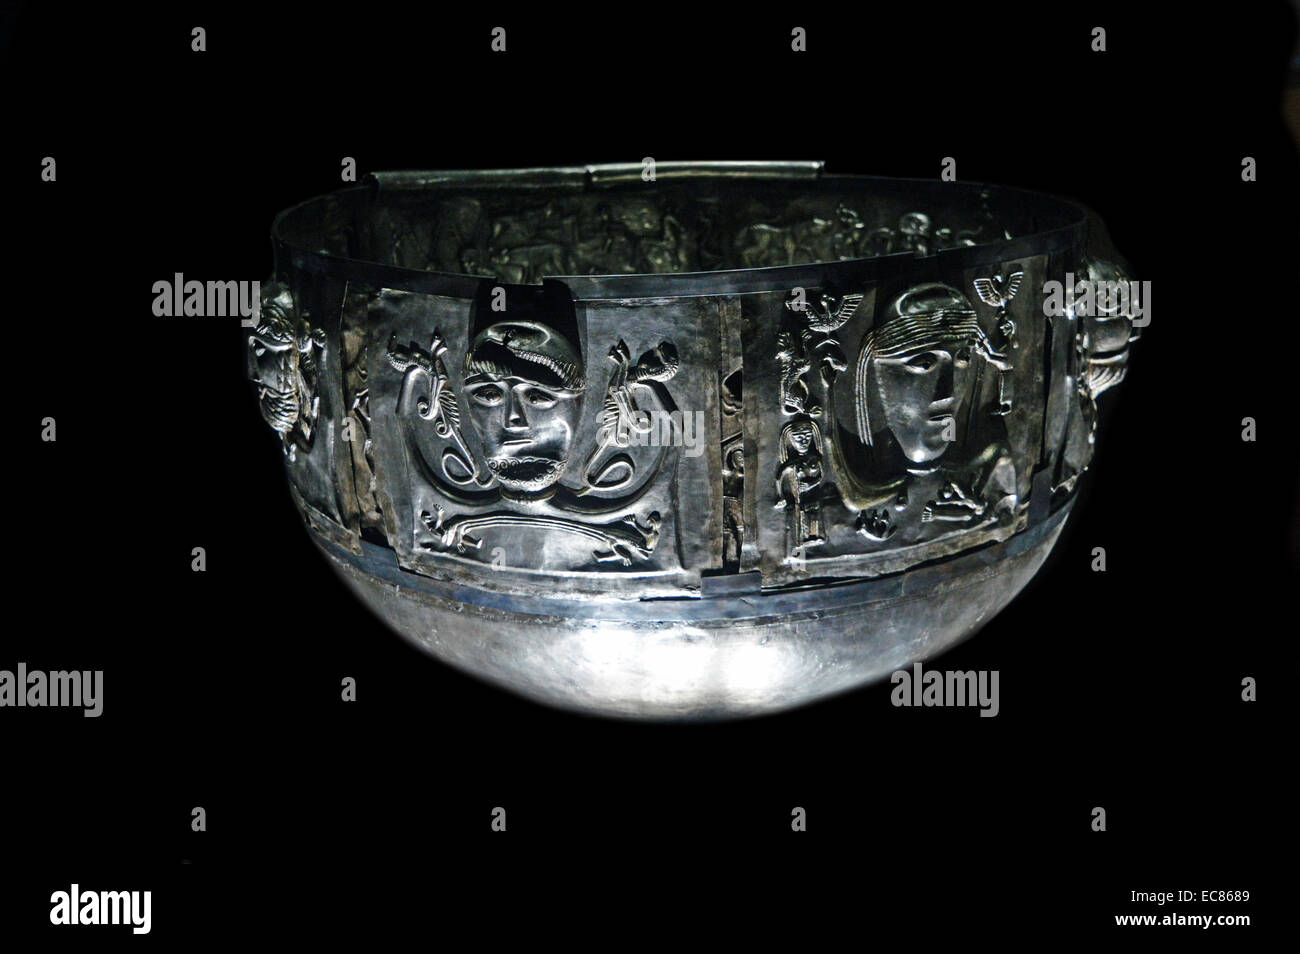 The Gundestrup cauldron is a richly decorated silver vessel; thought to date between 200 BC and 300 AD; placing it within the late La Tène period or early Roman Iron Age. The cauldron is the largest known example of European Iron Age silver work. It was found in 1891 in a peat bog near the hamlet of Gundestrup in the Aars parish of Himmerland; Denmark Stock Photo